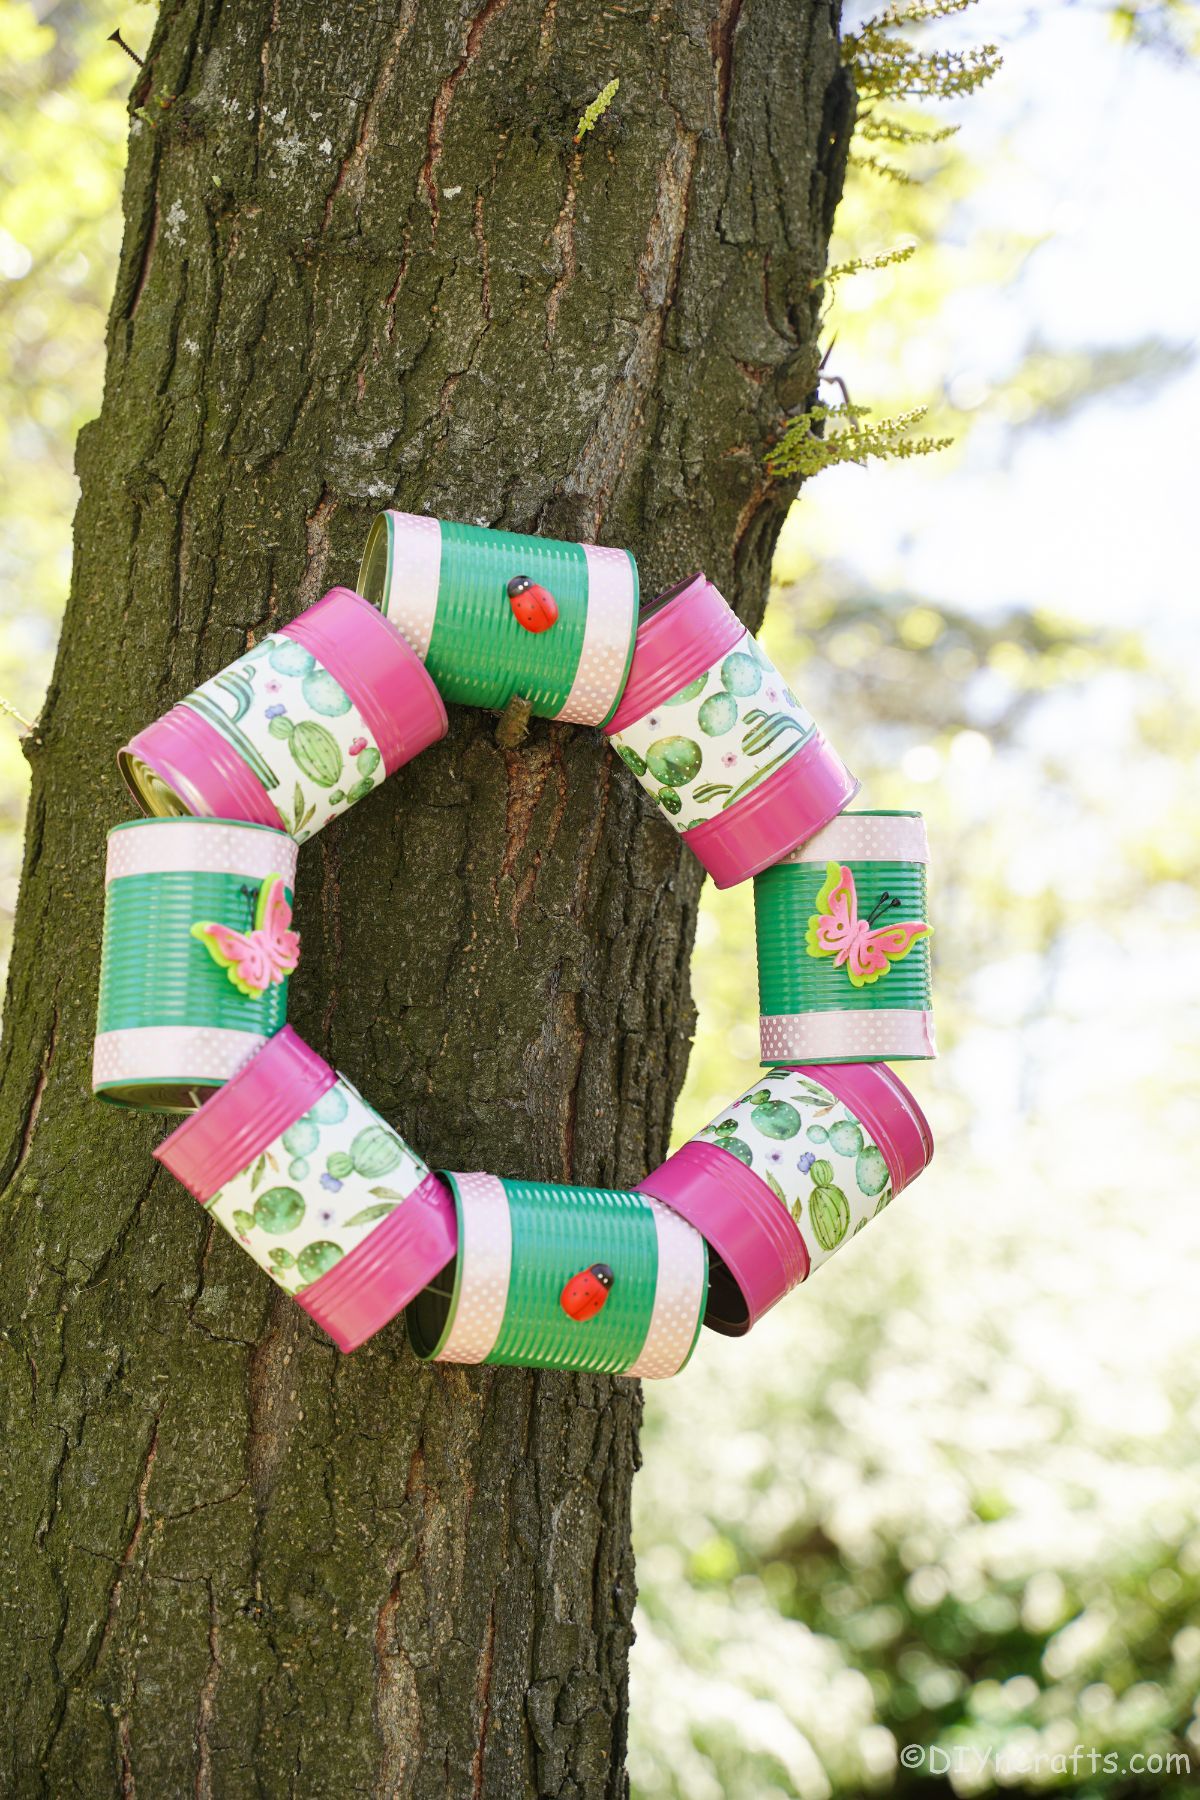 pink and green tin can wreath hanging on tree trunk